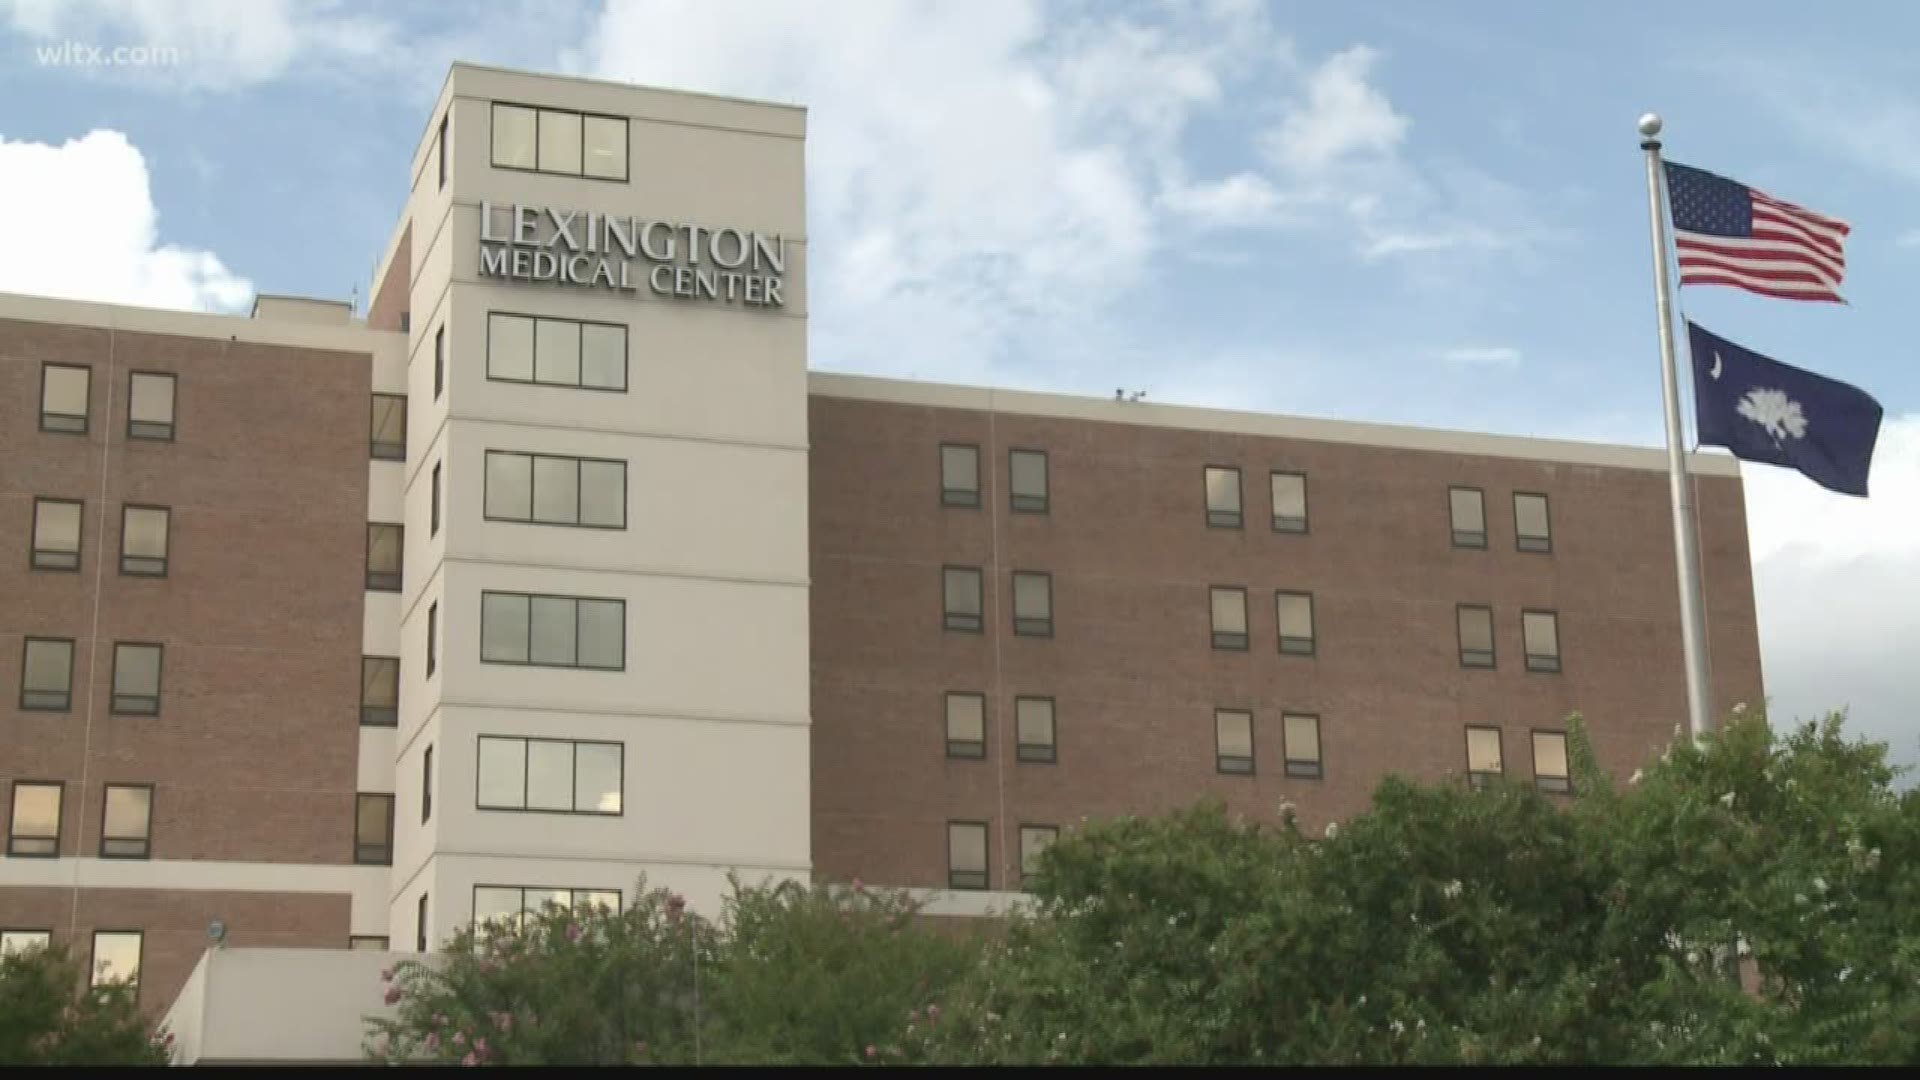 Lexington Medical Center has set up a special area to deal with any coronavirus cases which may come to the hospital.